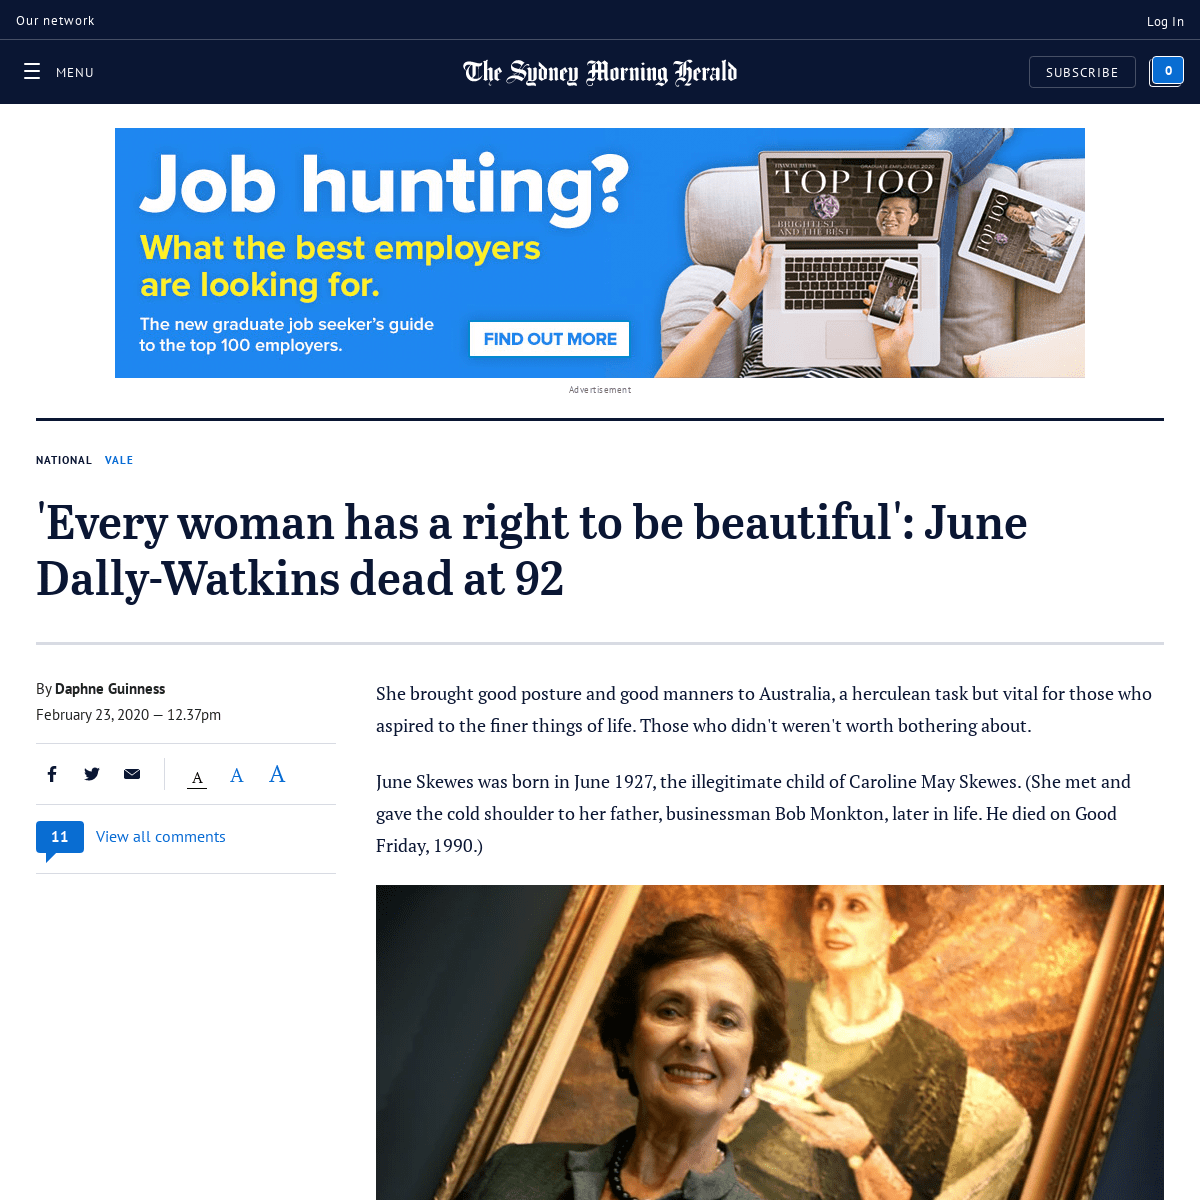 A complete backup of www.smh.com.au/national/every-woman-has-a-right-to-be-beautiful-dally-watkins-dead-at-92-20200223-p543hn.ht